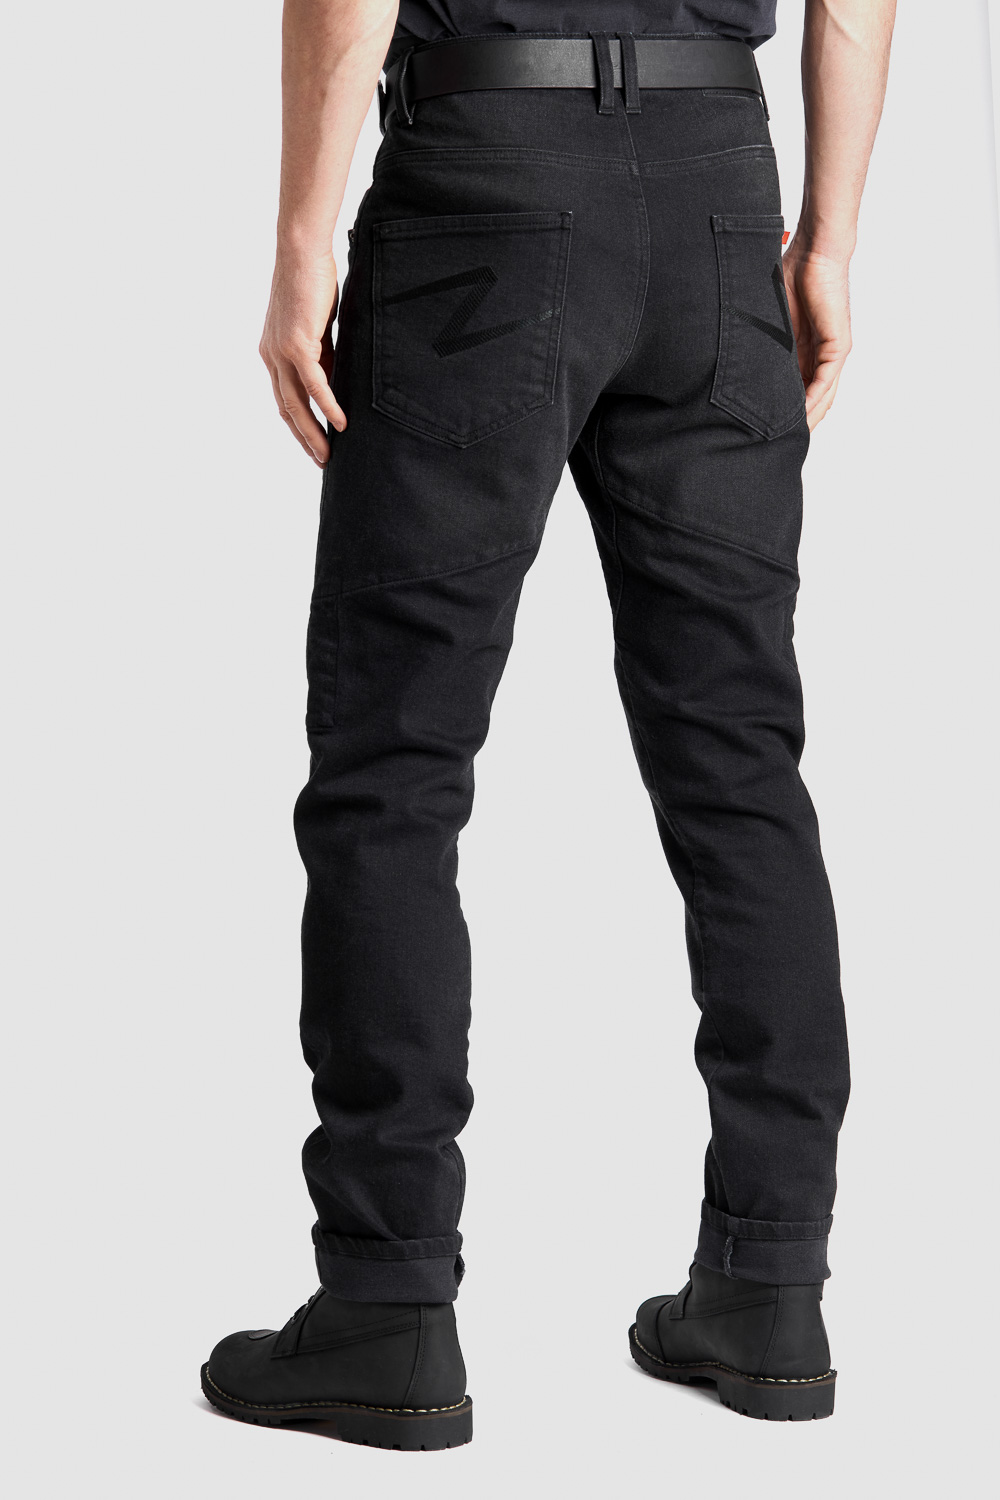 BOSS DYN 01 – Motorcycle Jeans Men’s Slim-Fit Cordura® and UHMWPE 2